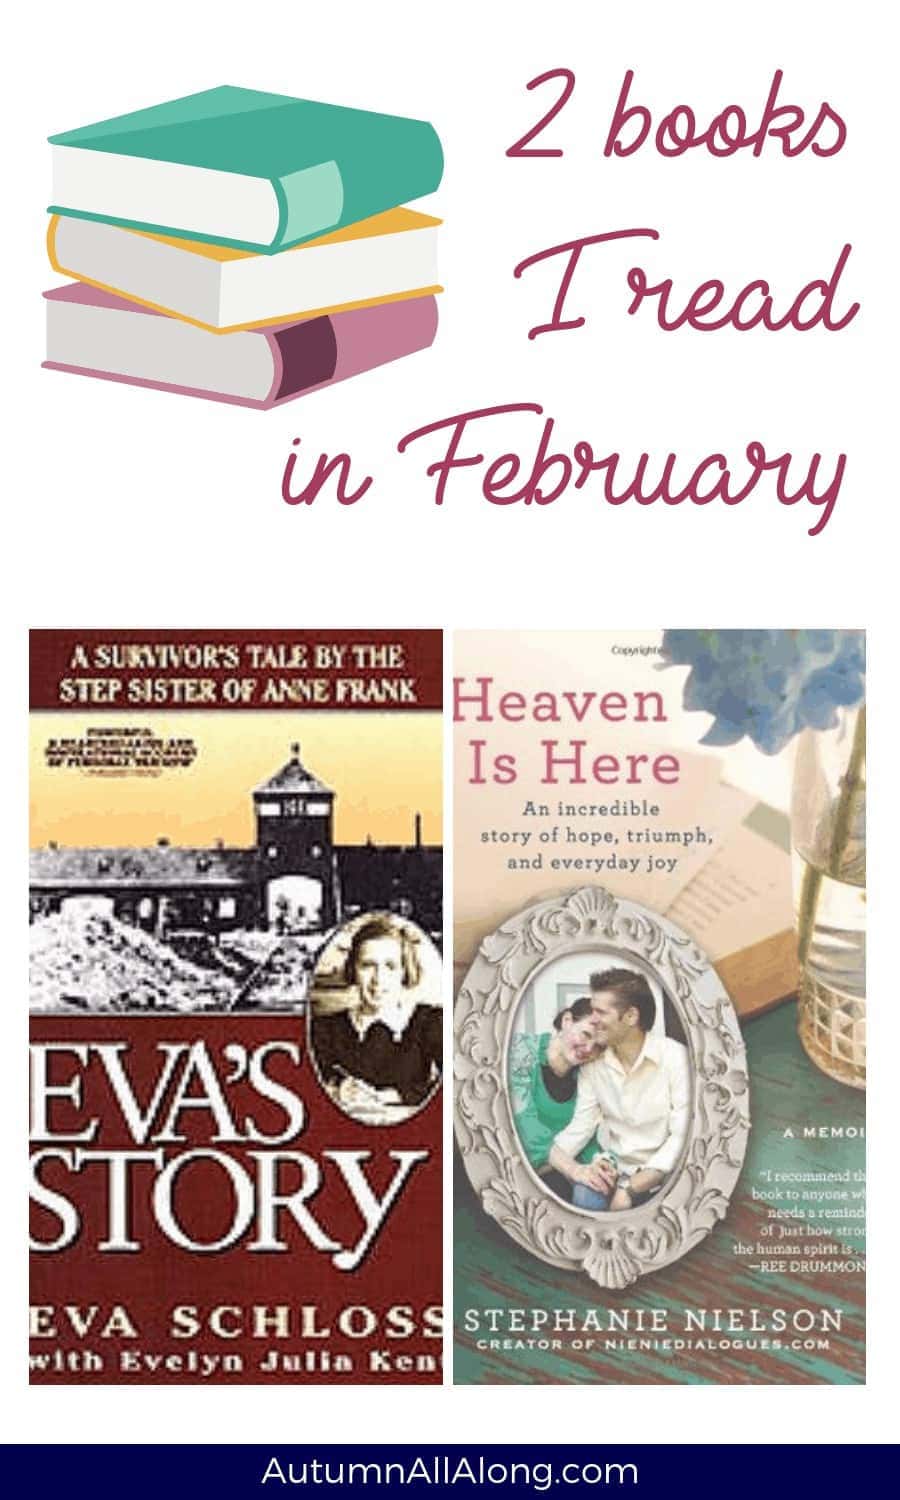 These are the books I read in February. Reviews on: Eva's Story by Eva Schloss and Heaven is Here by Stephanie Nielsen. | via Autumn All Along